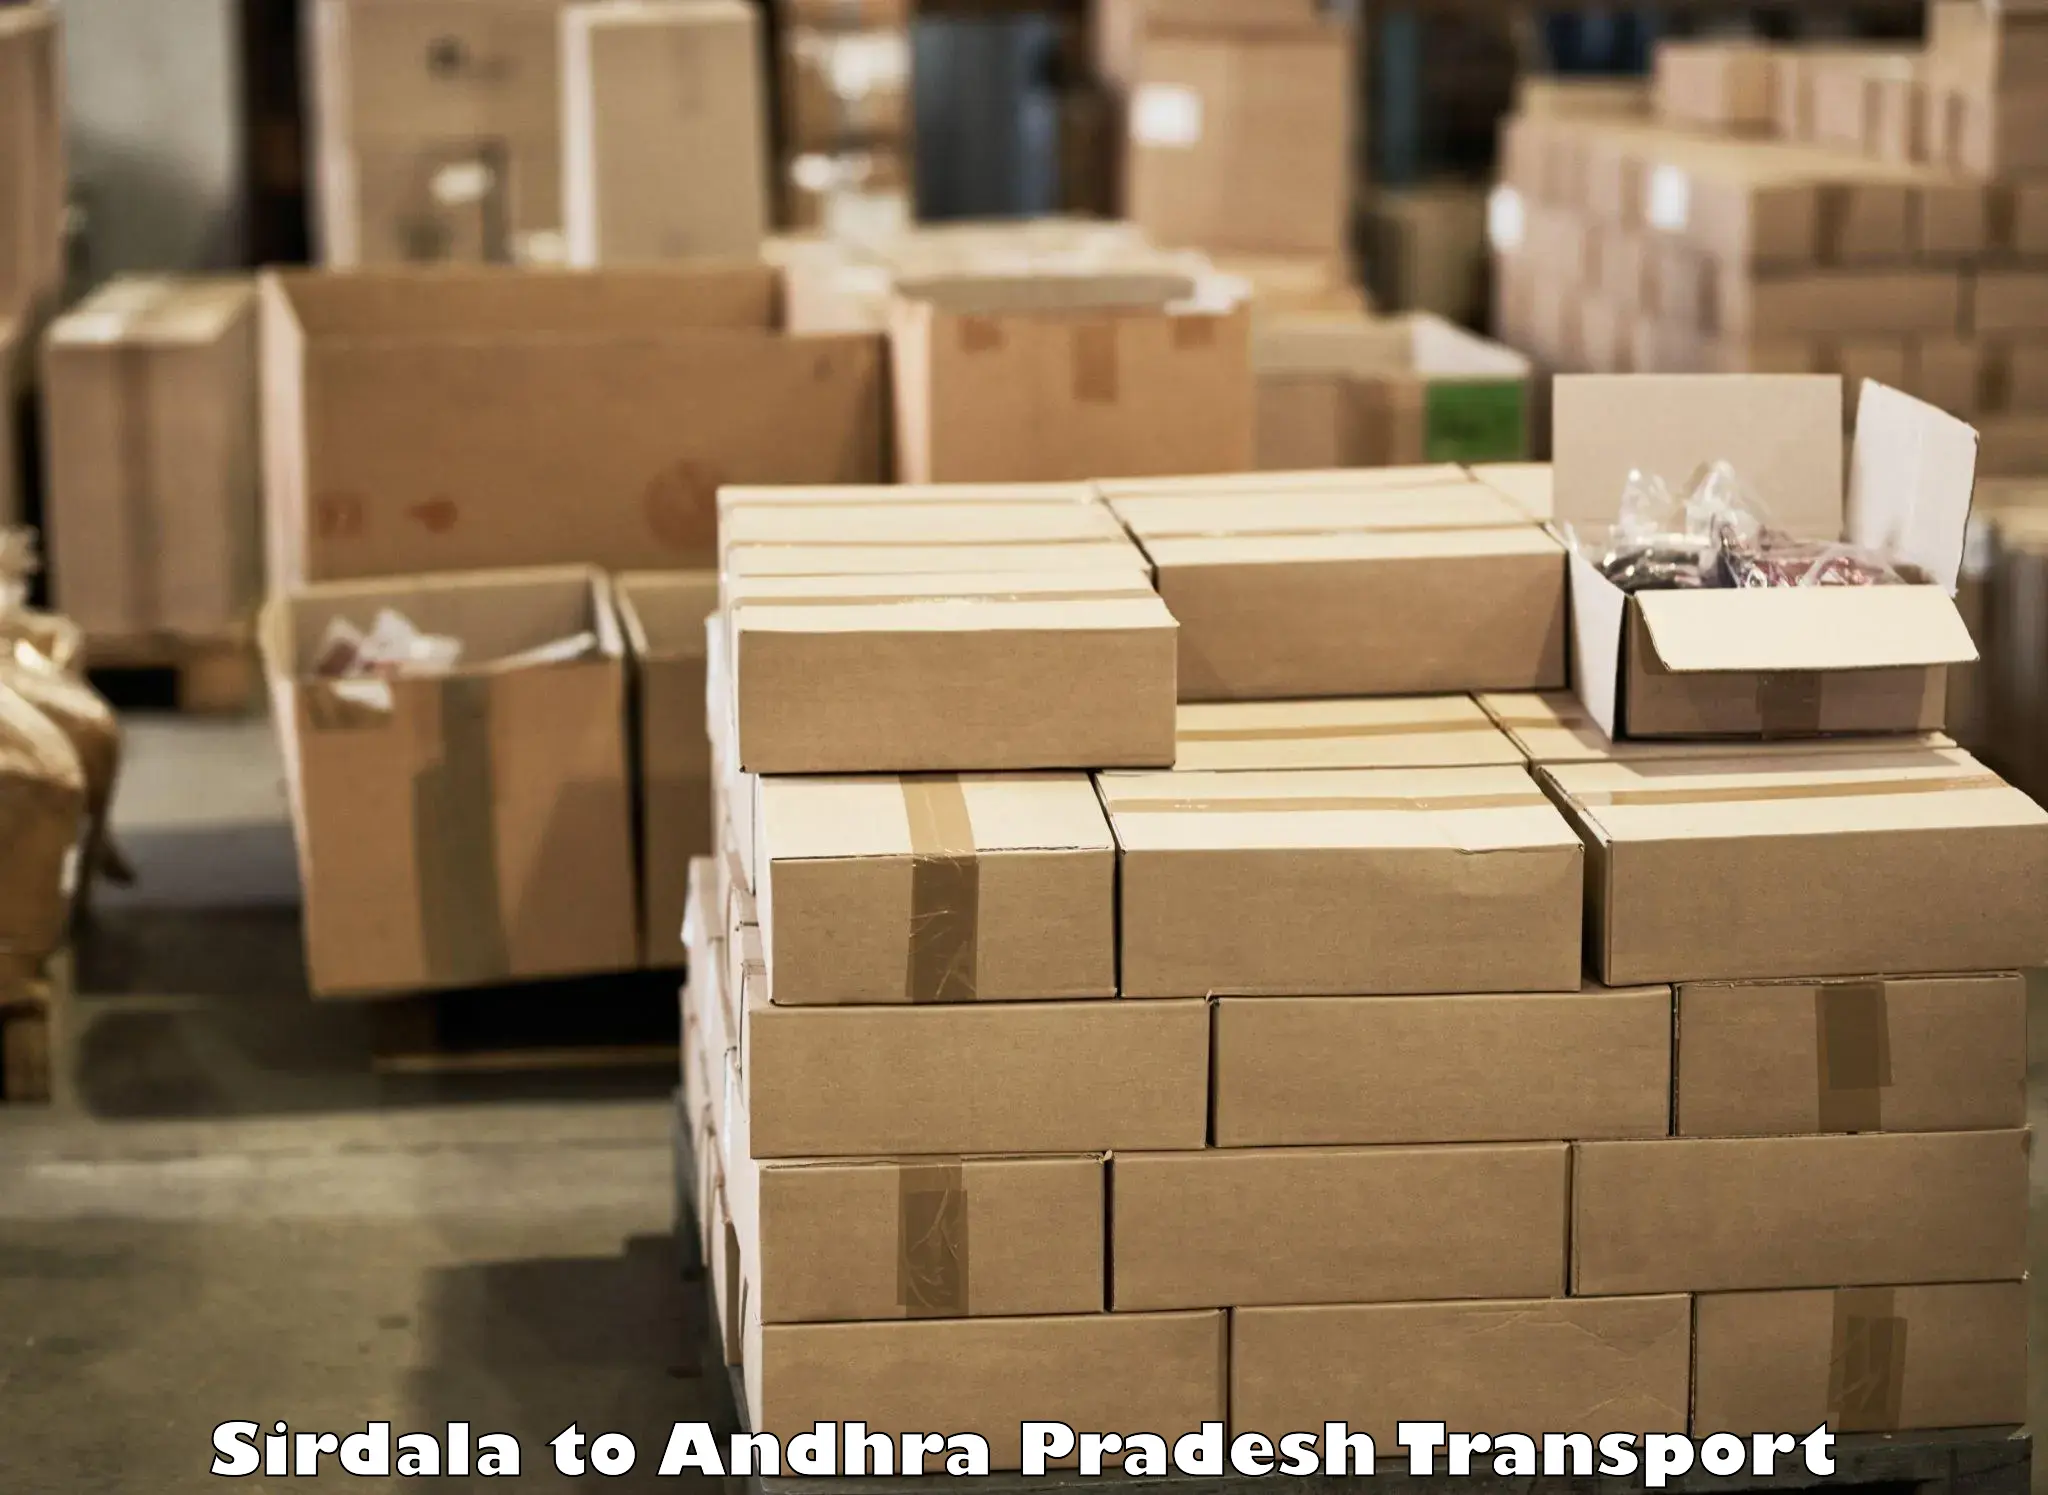 Express transport services Sirdala to Pulivendula